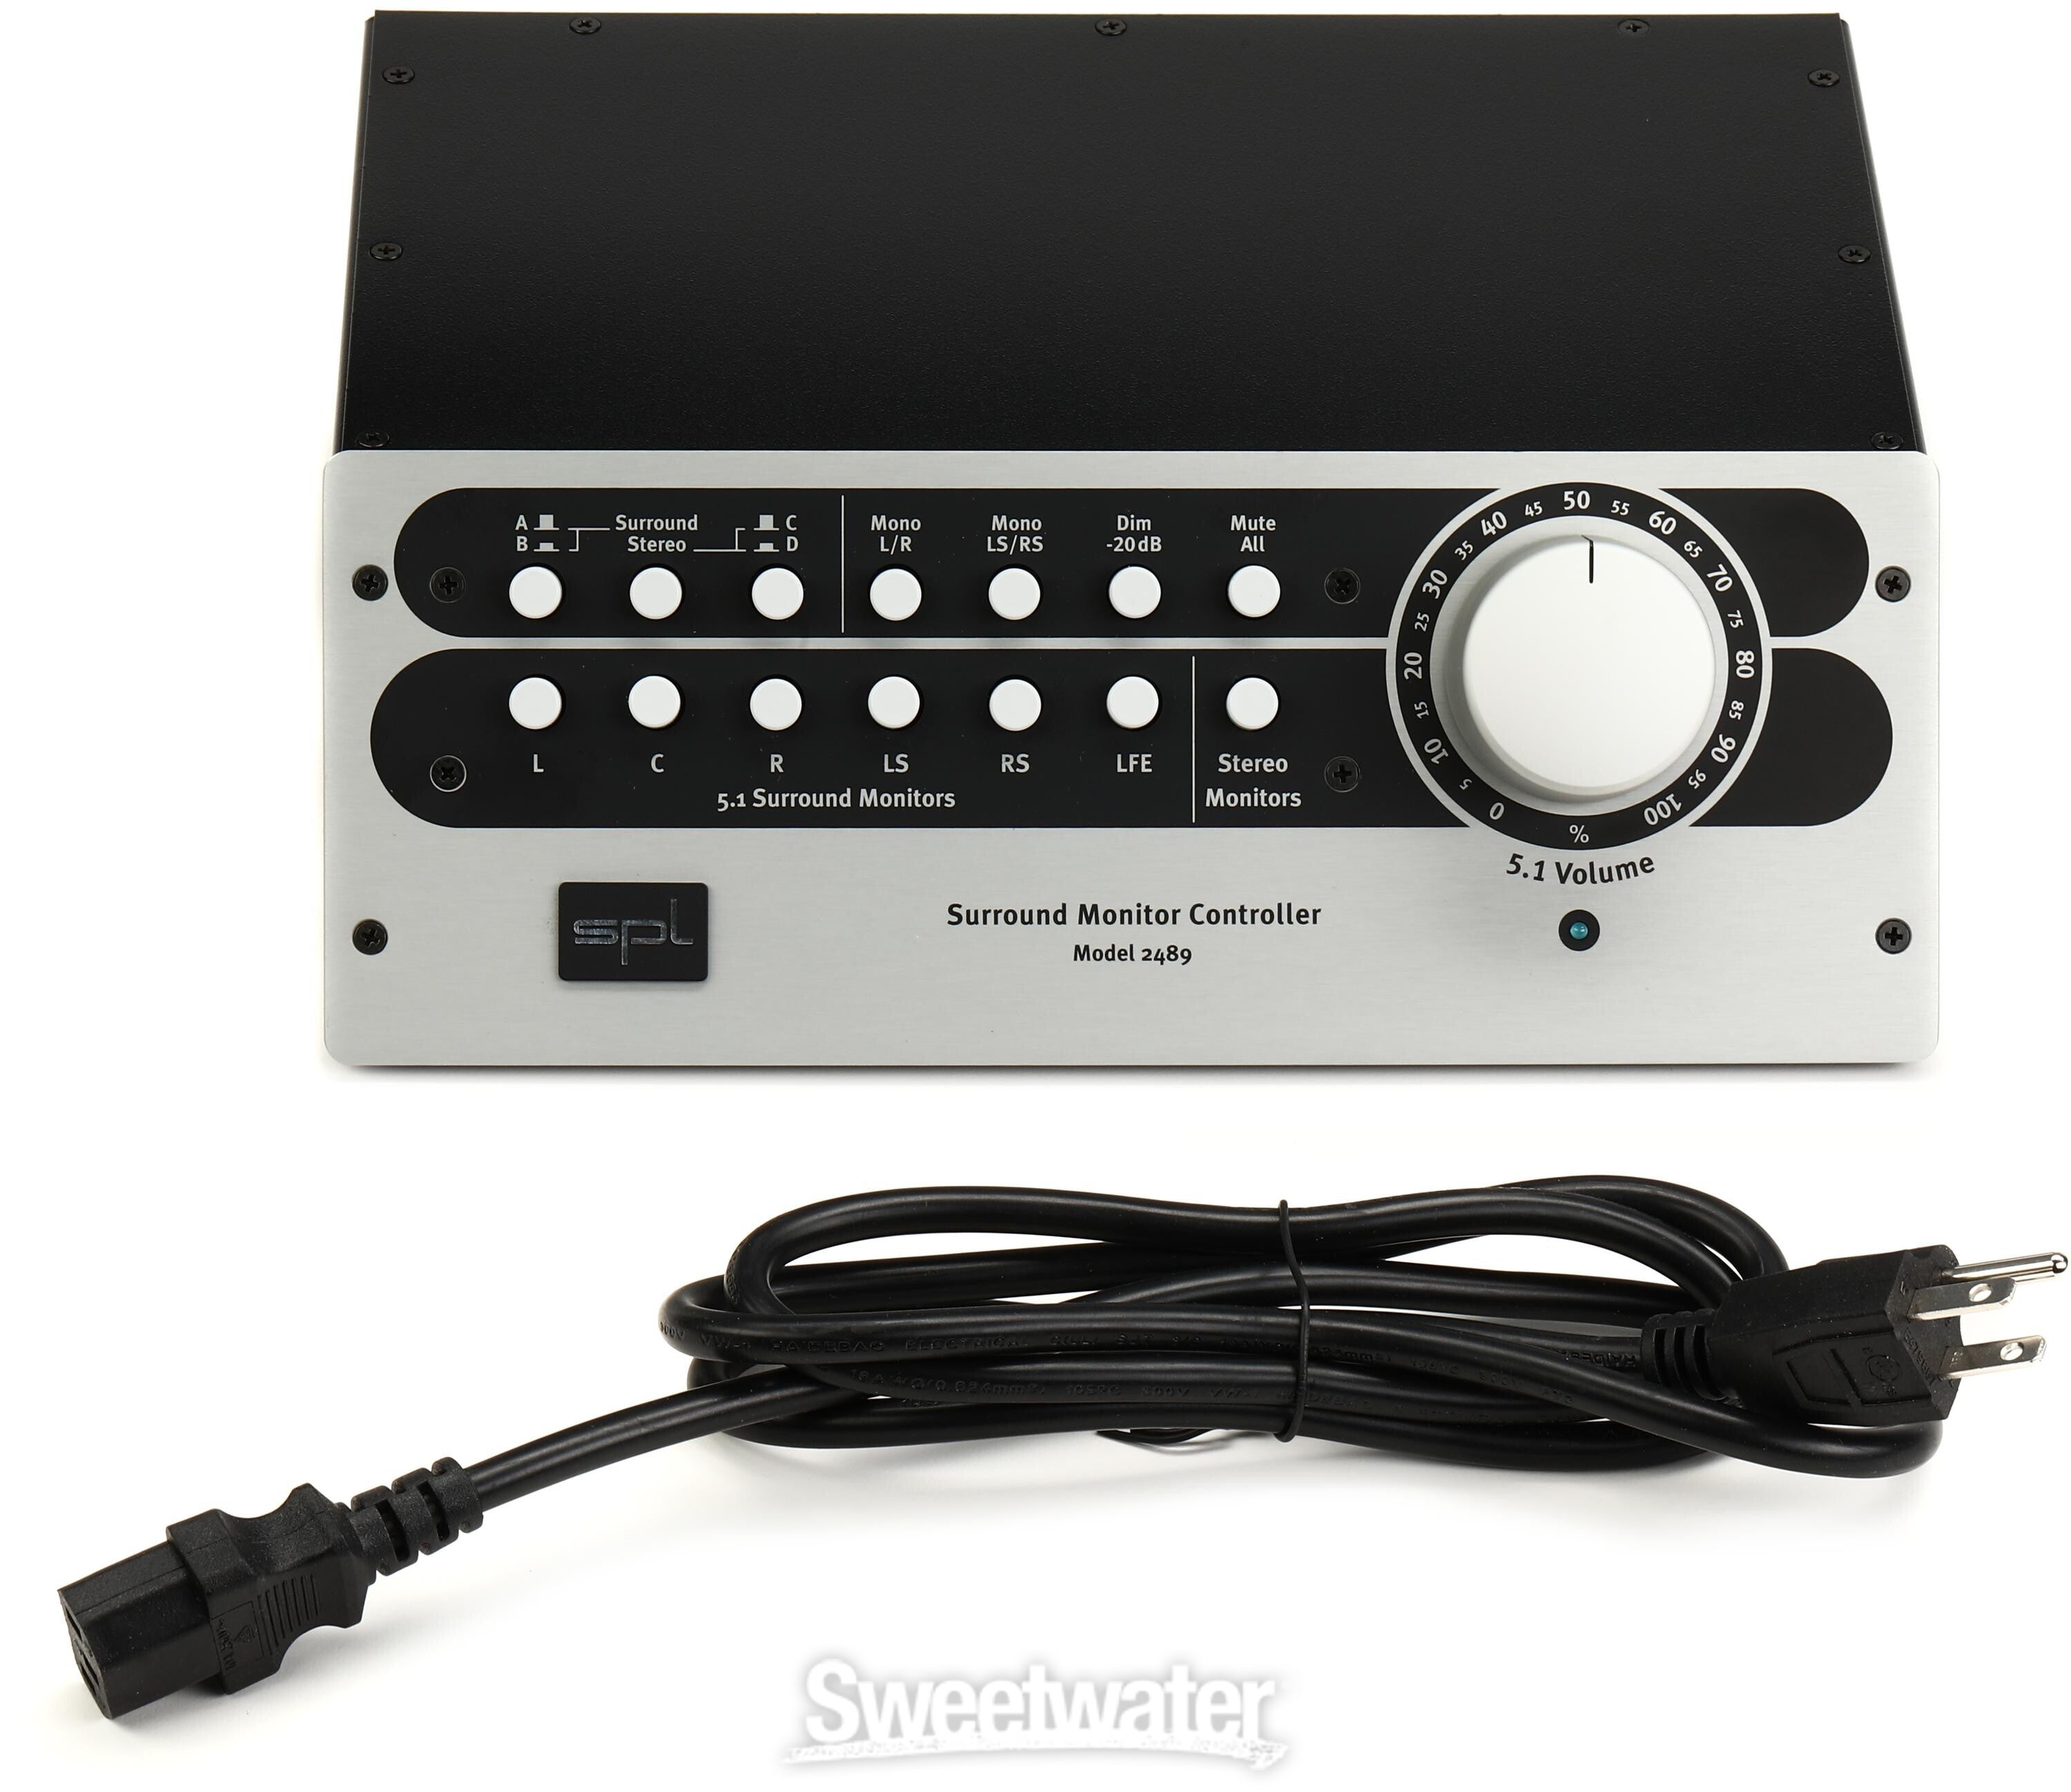 SPL SMC Surround Monitor Controller | Sweetwater